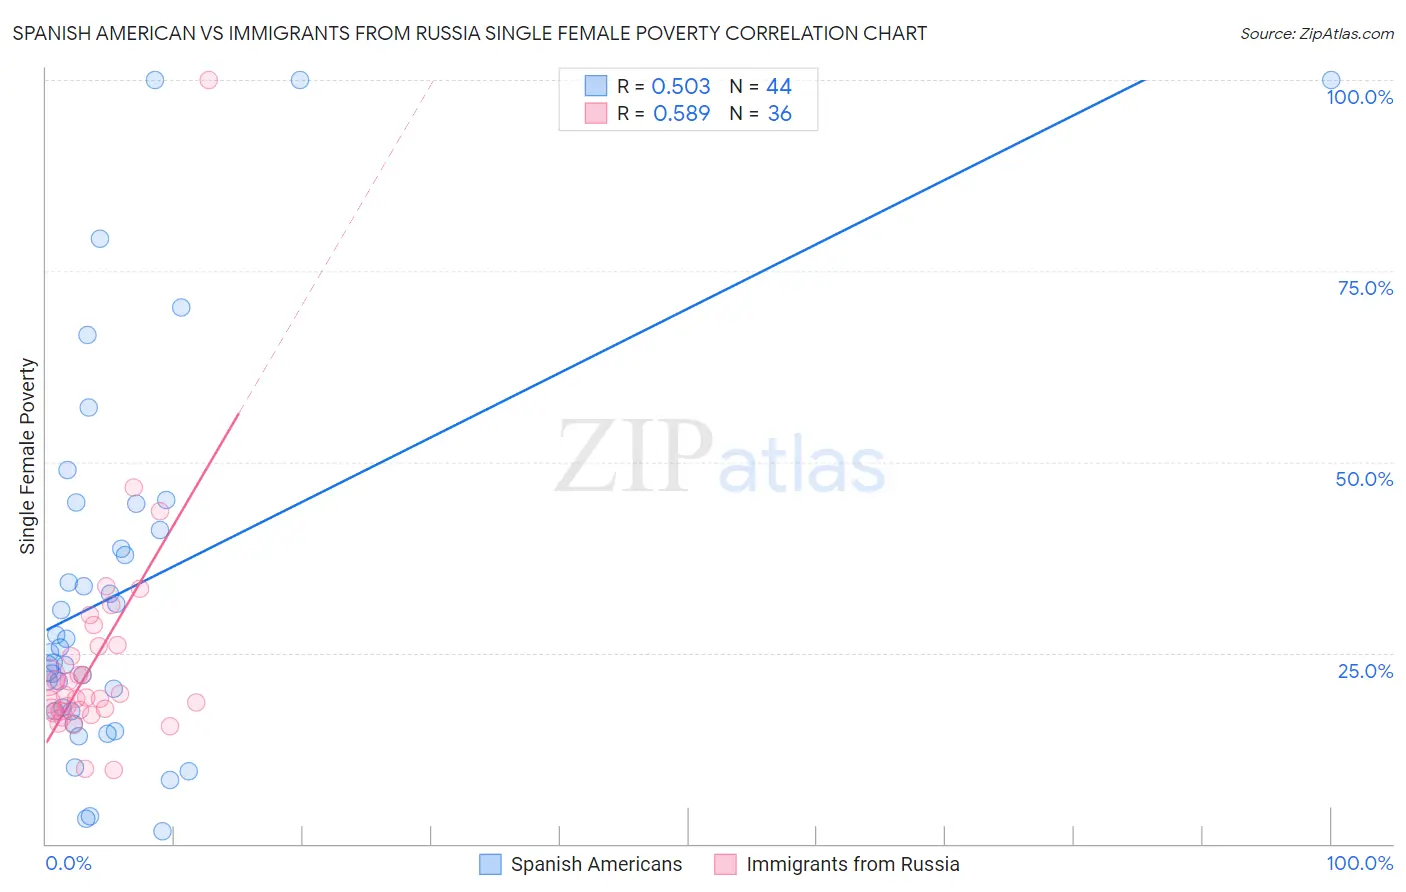 Spanish American vs Immigrants from Russia Single Female Poverty